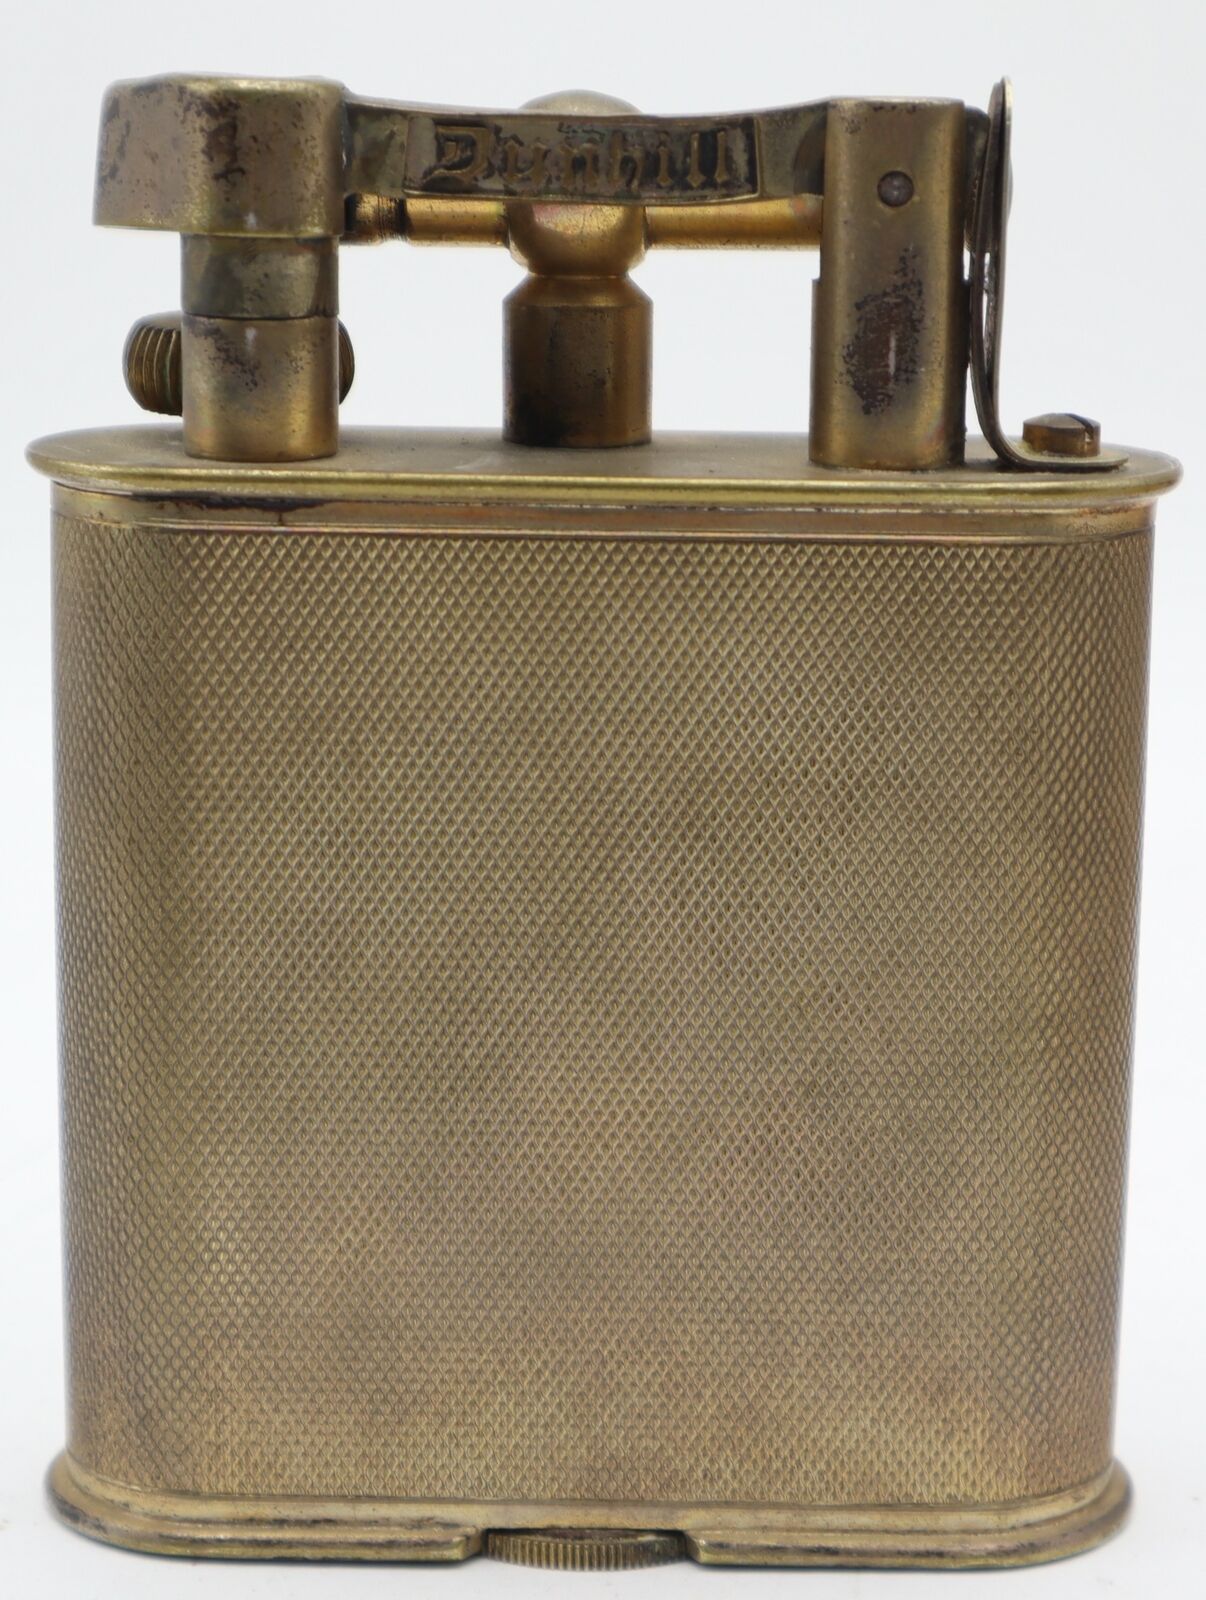 DUNHILL Table lighter, patent 143752, England 1485418. Silver Plate